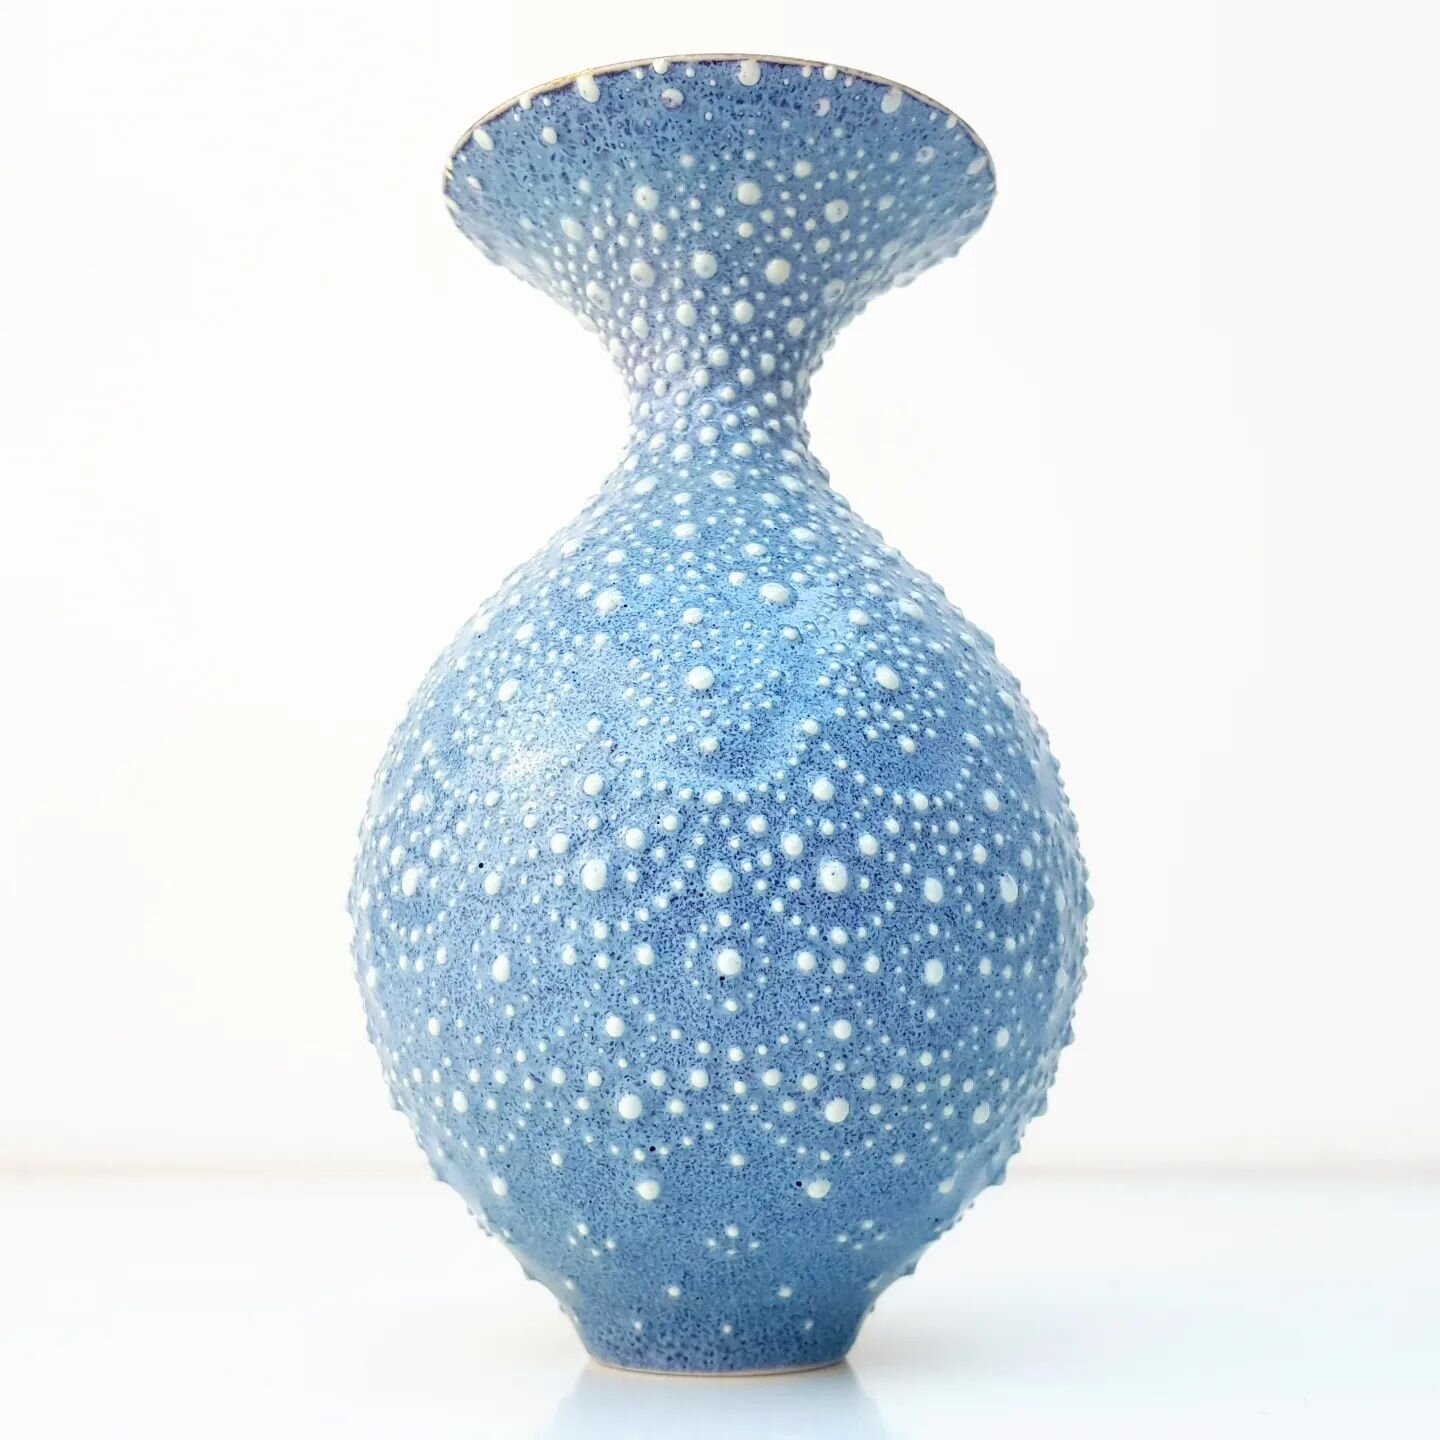 'Three Thousand and Sixty'
Named after the exact number of dots on the surface. Hand thrown, hand decorated, and  finished with a copper blue glaze and 24ct gold lustre on the interior. These fluted forms are a challenge to throw and turn but I just 